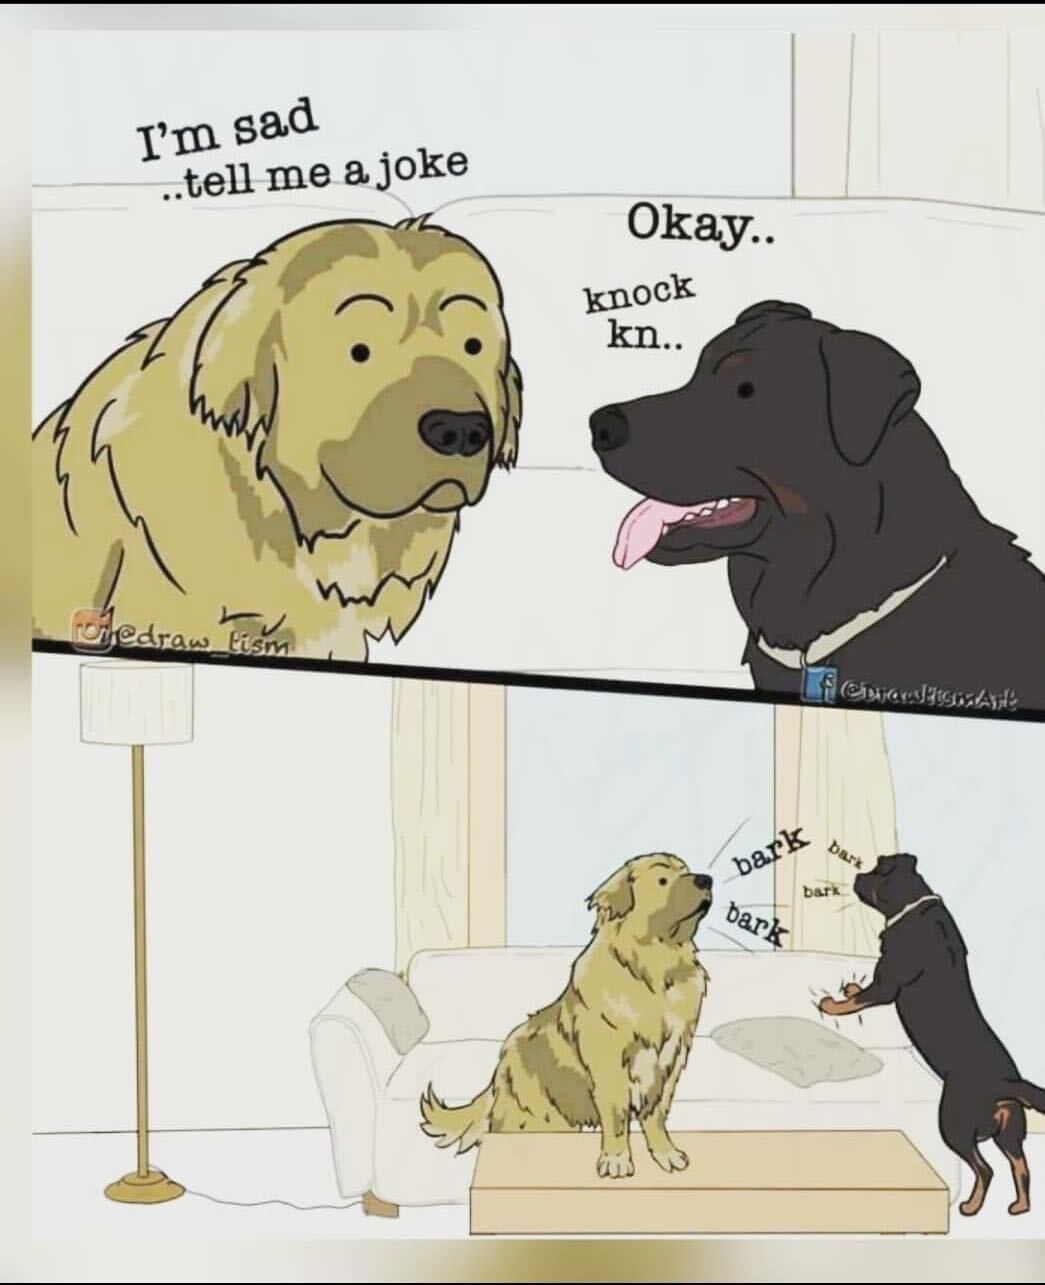 Dogs are the joke.